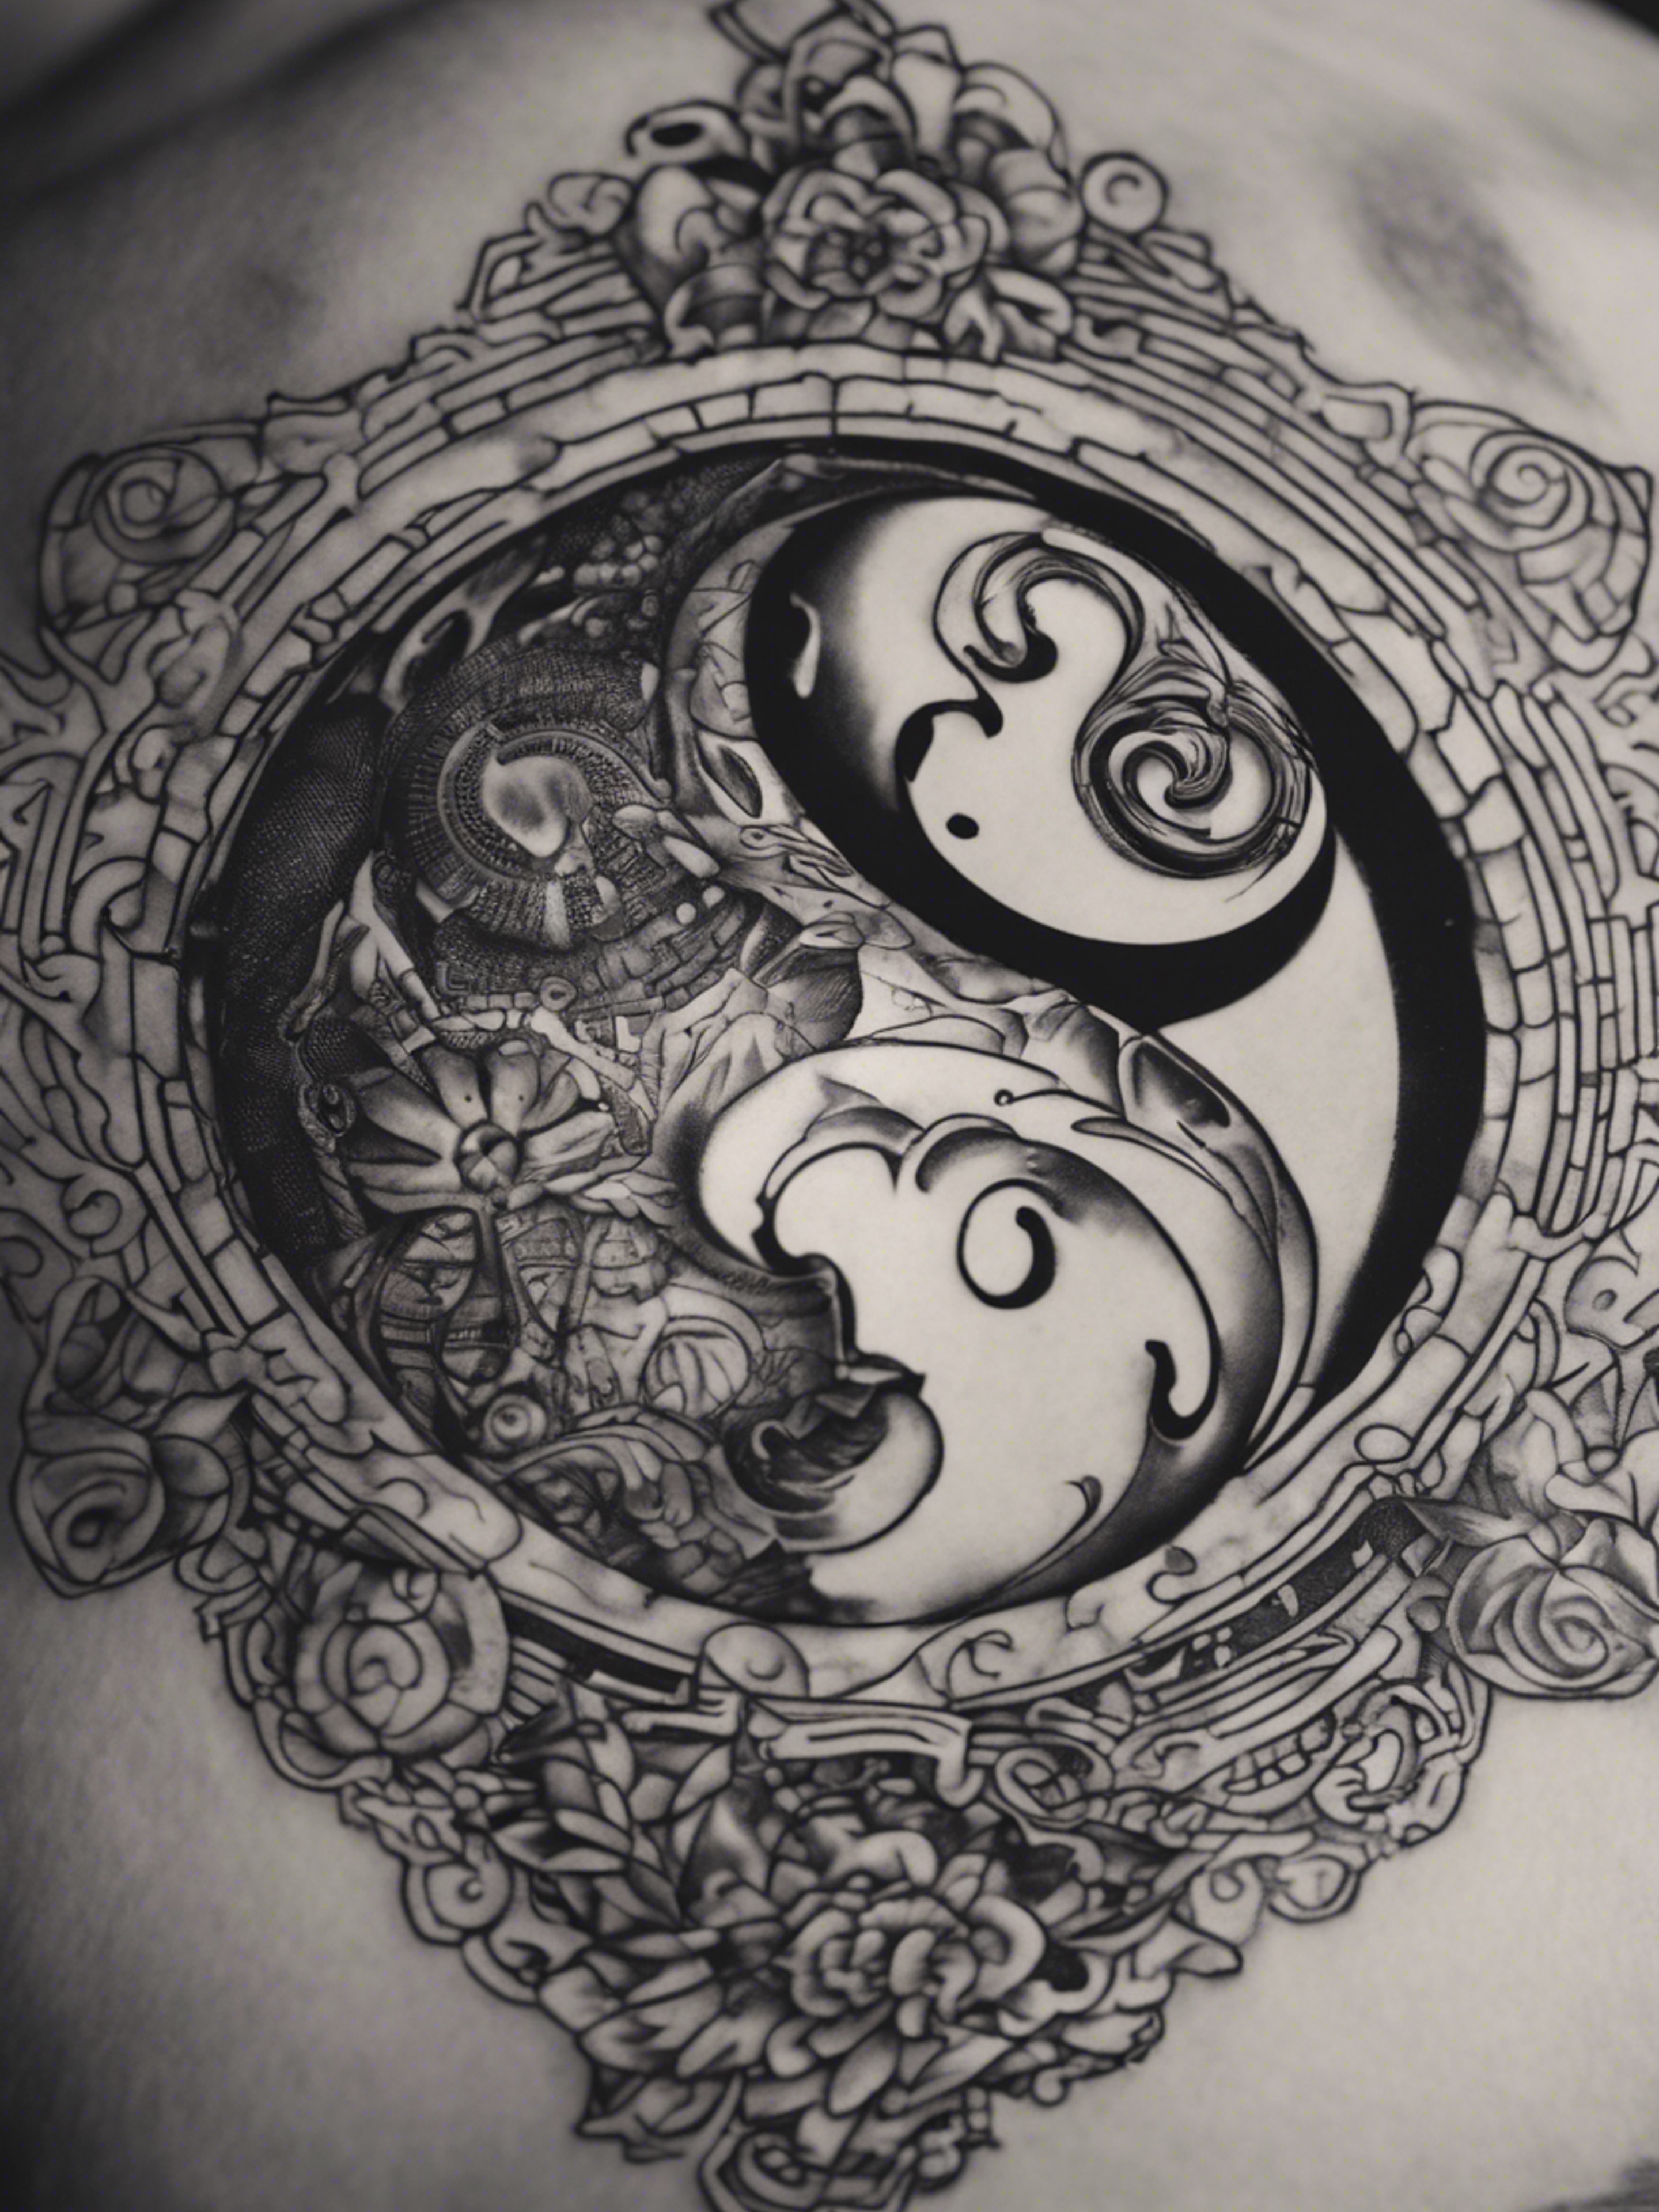 A black and gray tattoo demonstrating the sharp contrast of yin and yang. 벽지[cf6688009cd14e619f30]